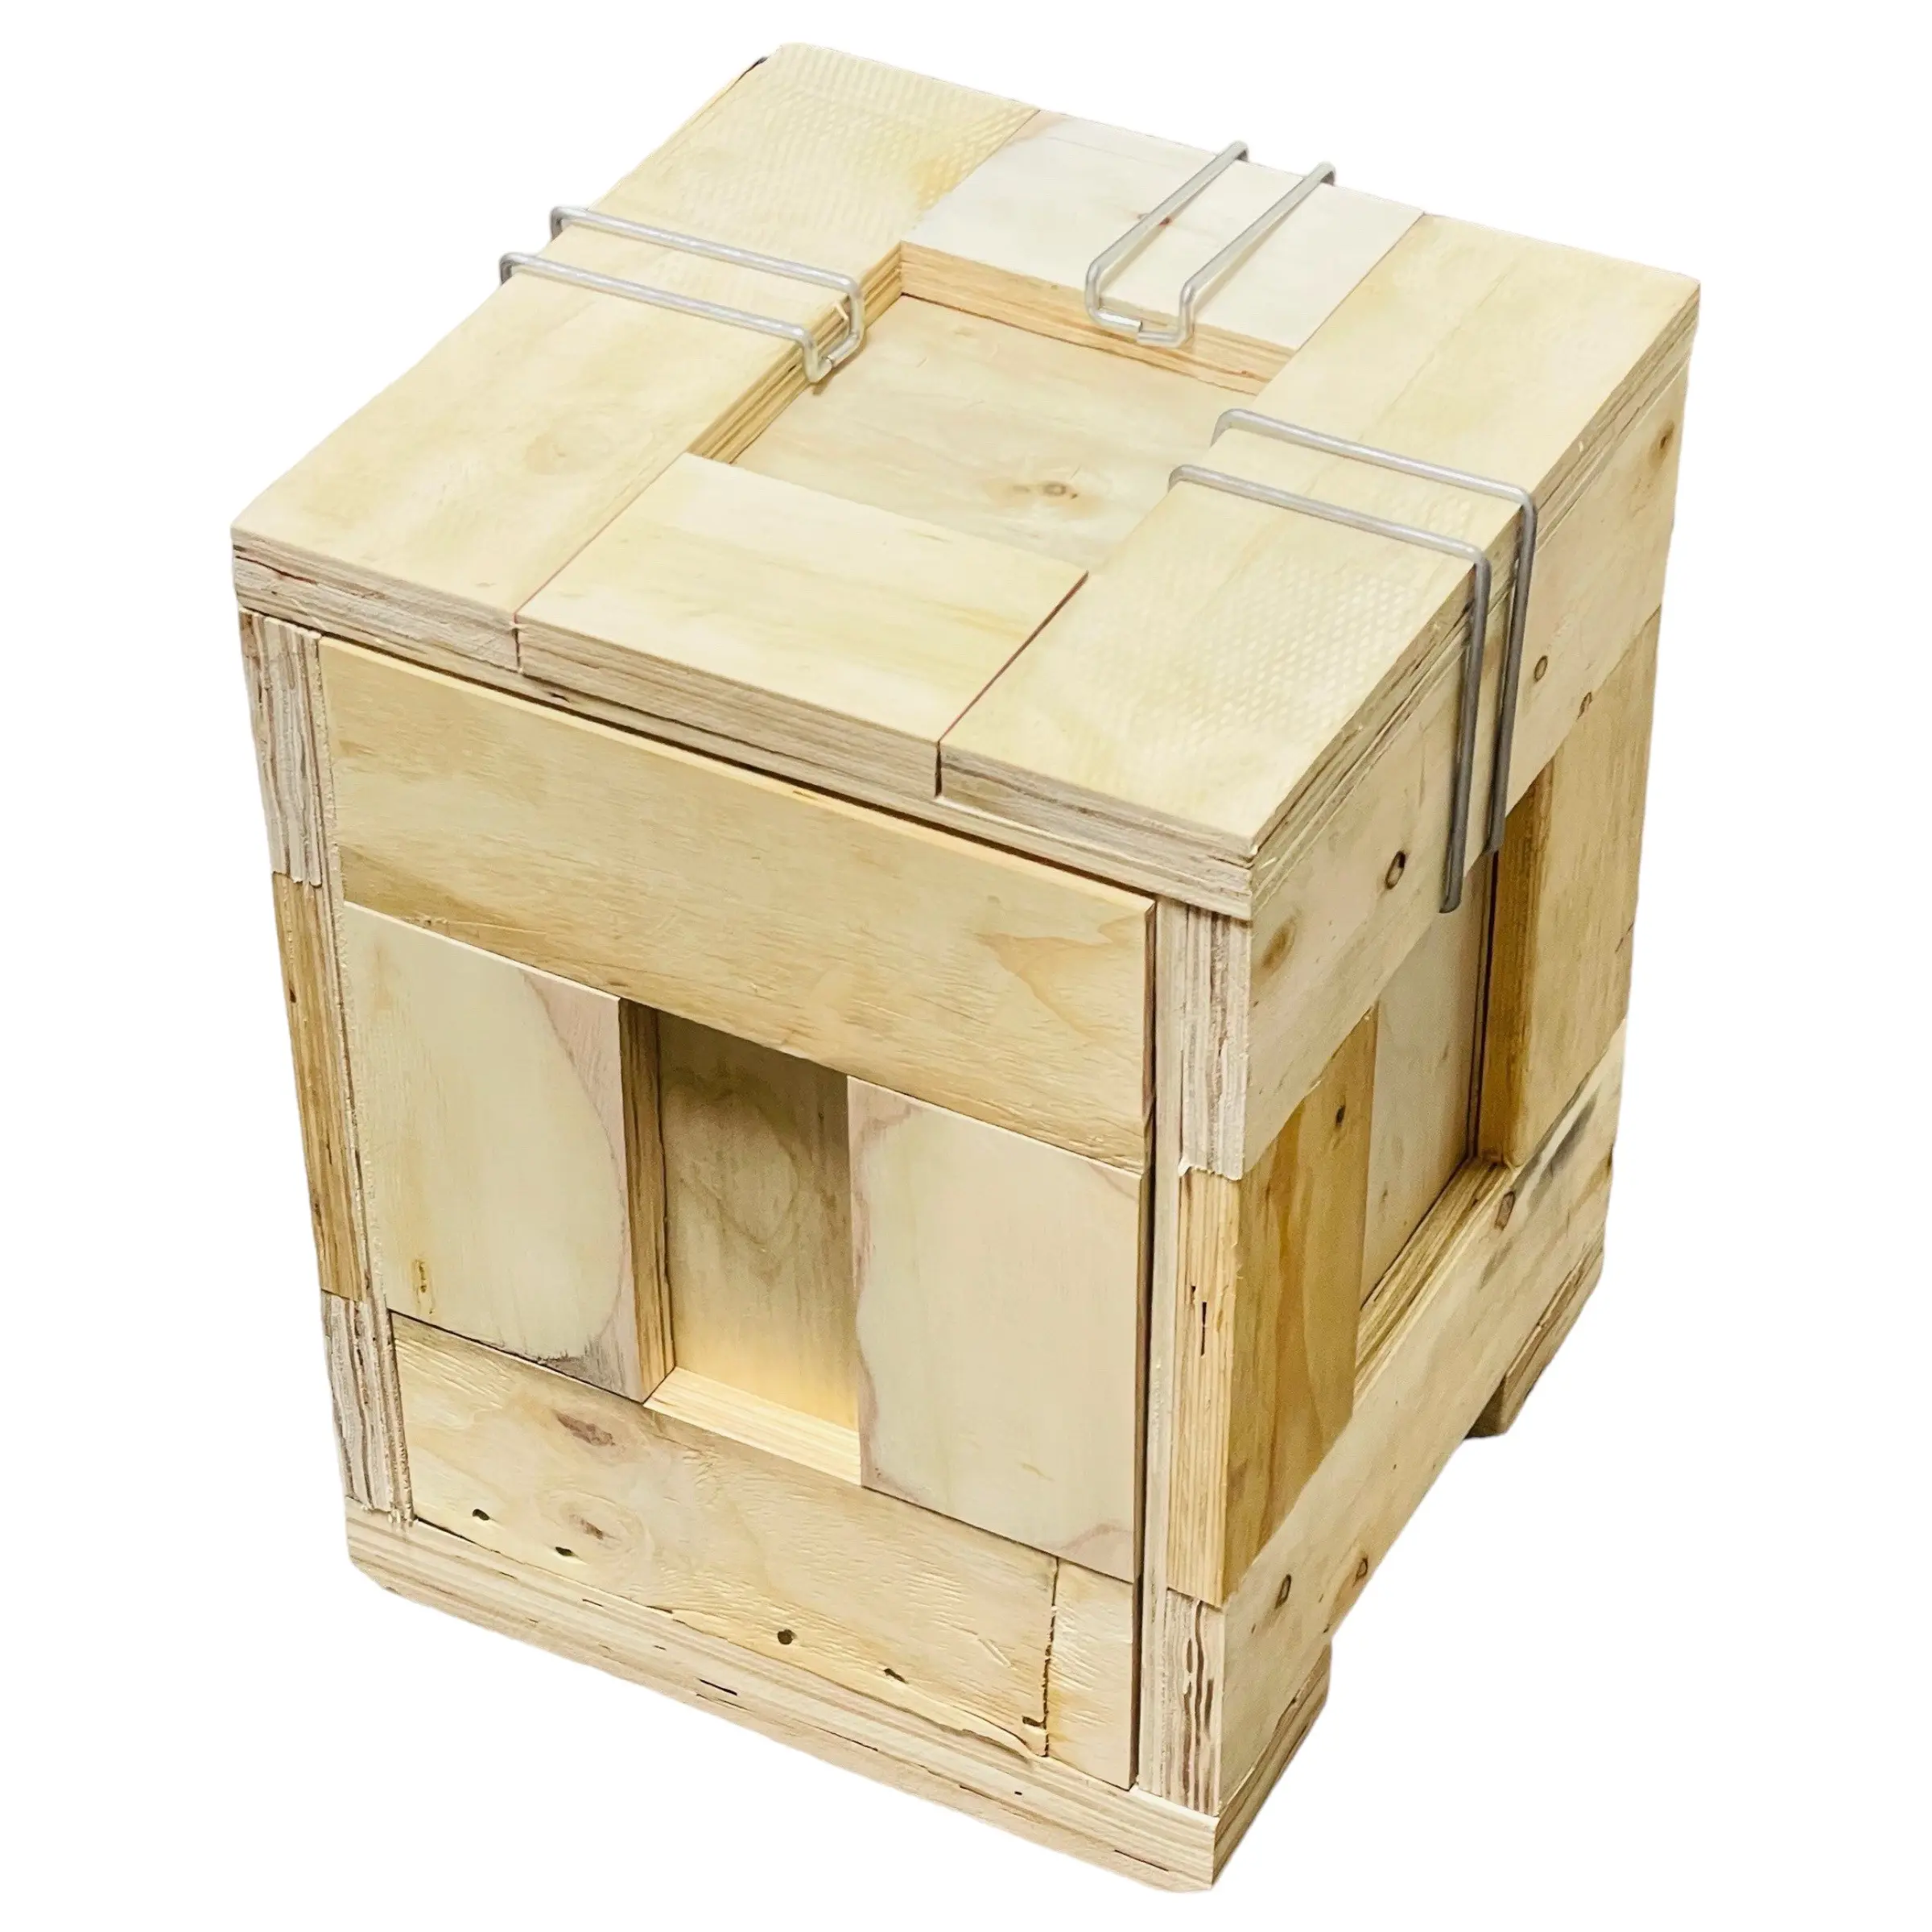 New Design Storage And Export Fumigated Wooden Crates Wholesale Cheap Wooden Crates Wholesale Made By Vietnam Manufacturer